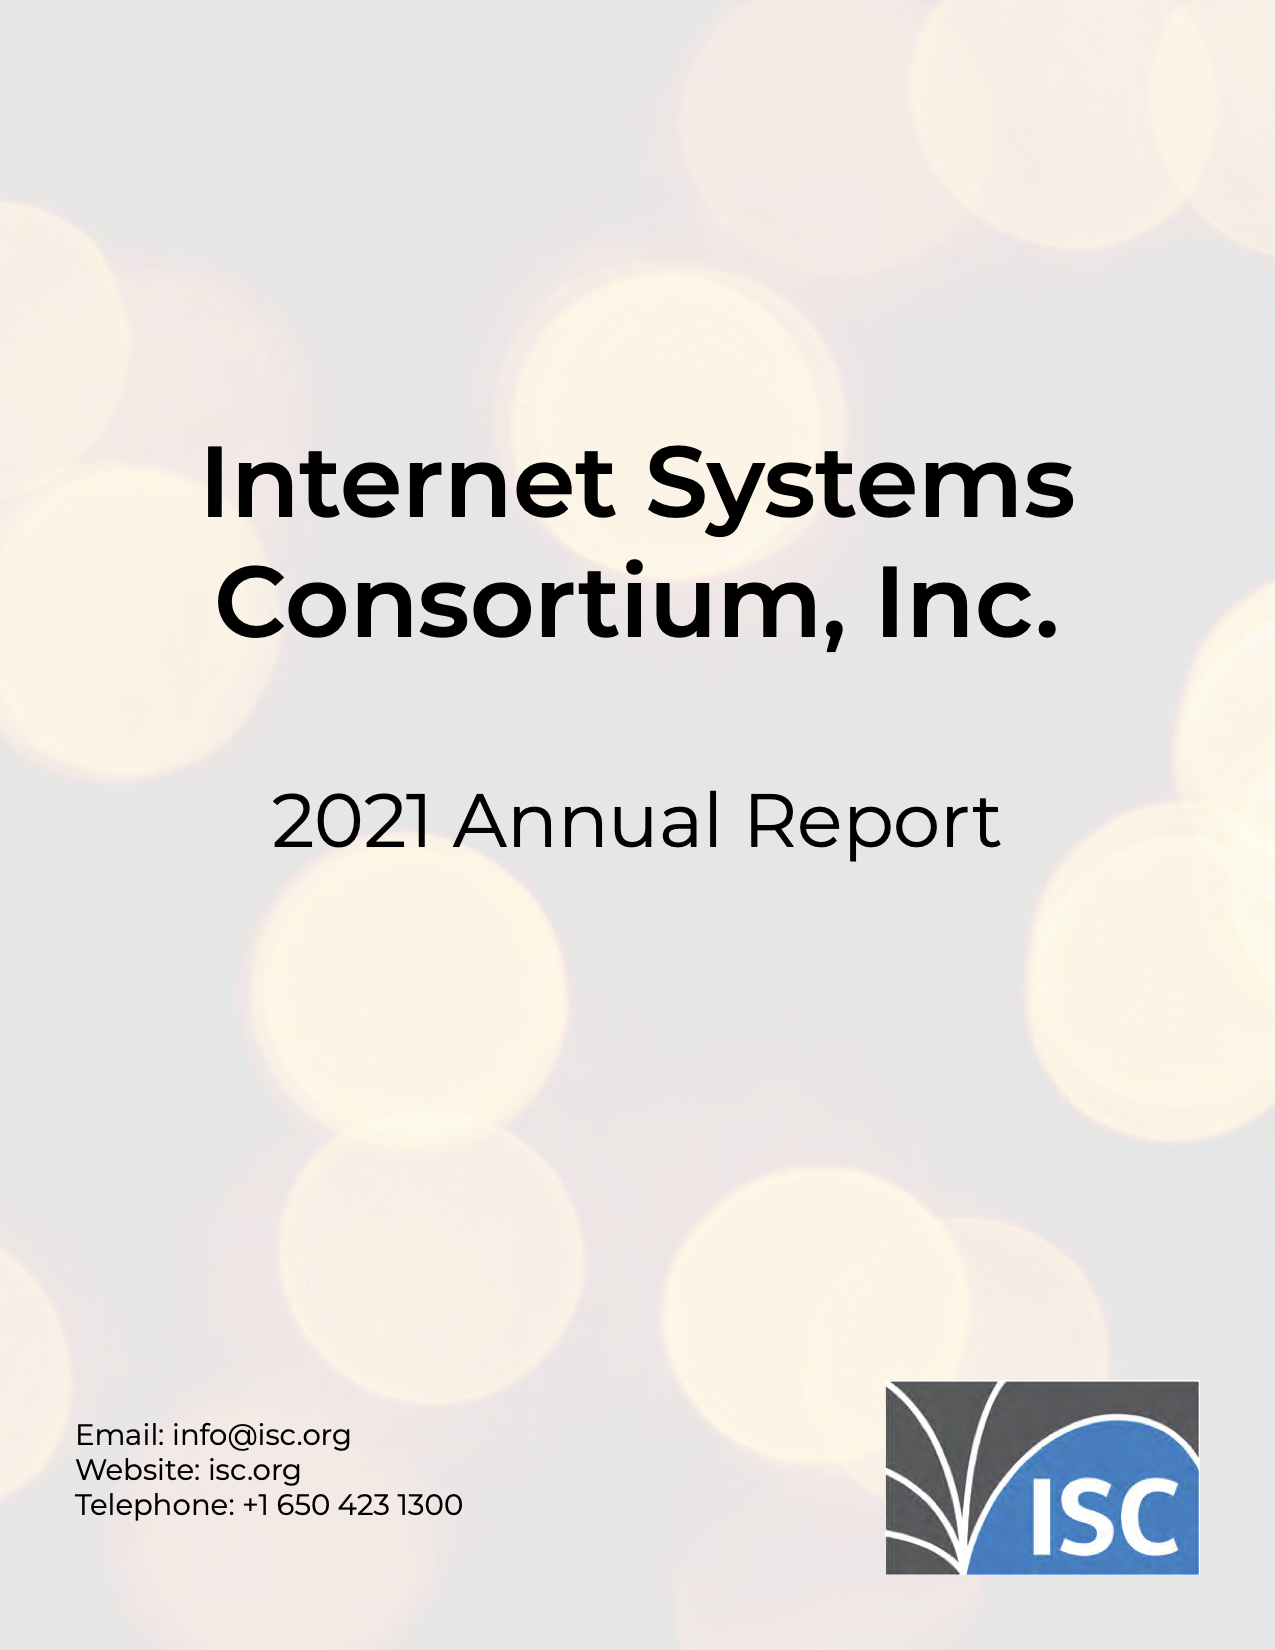 ISC's 2021 annual report